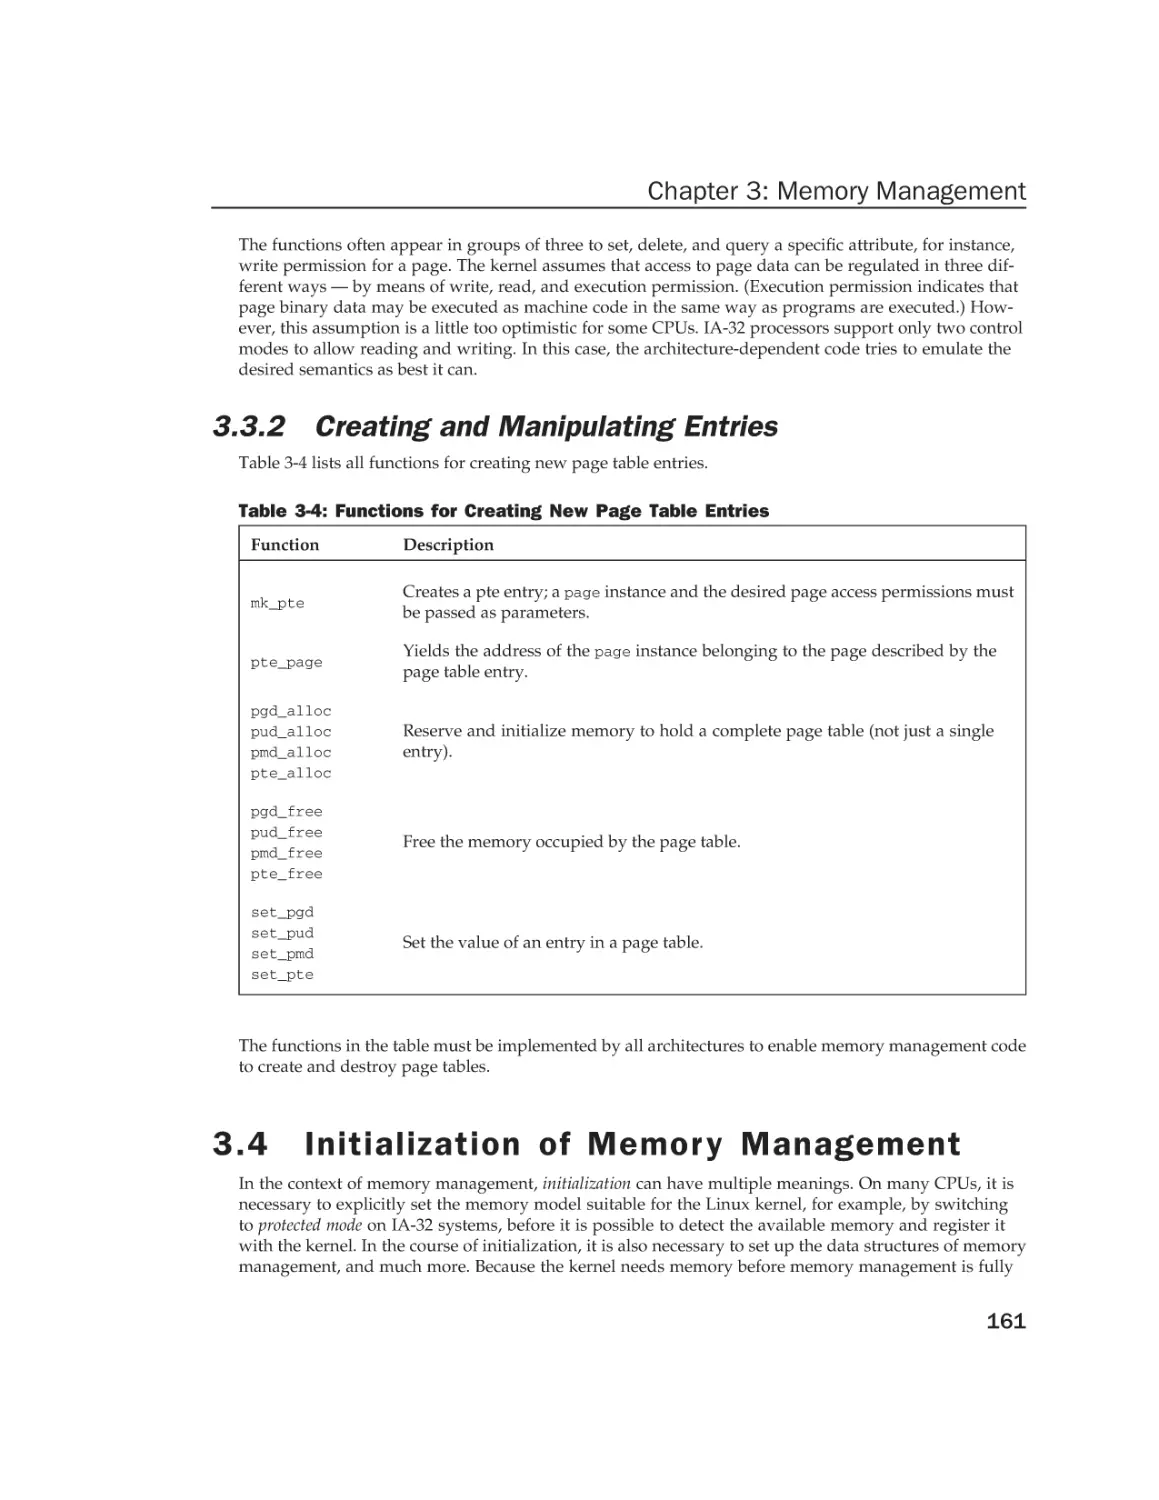 3.4 Initialization of Memory Management